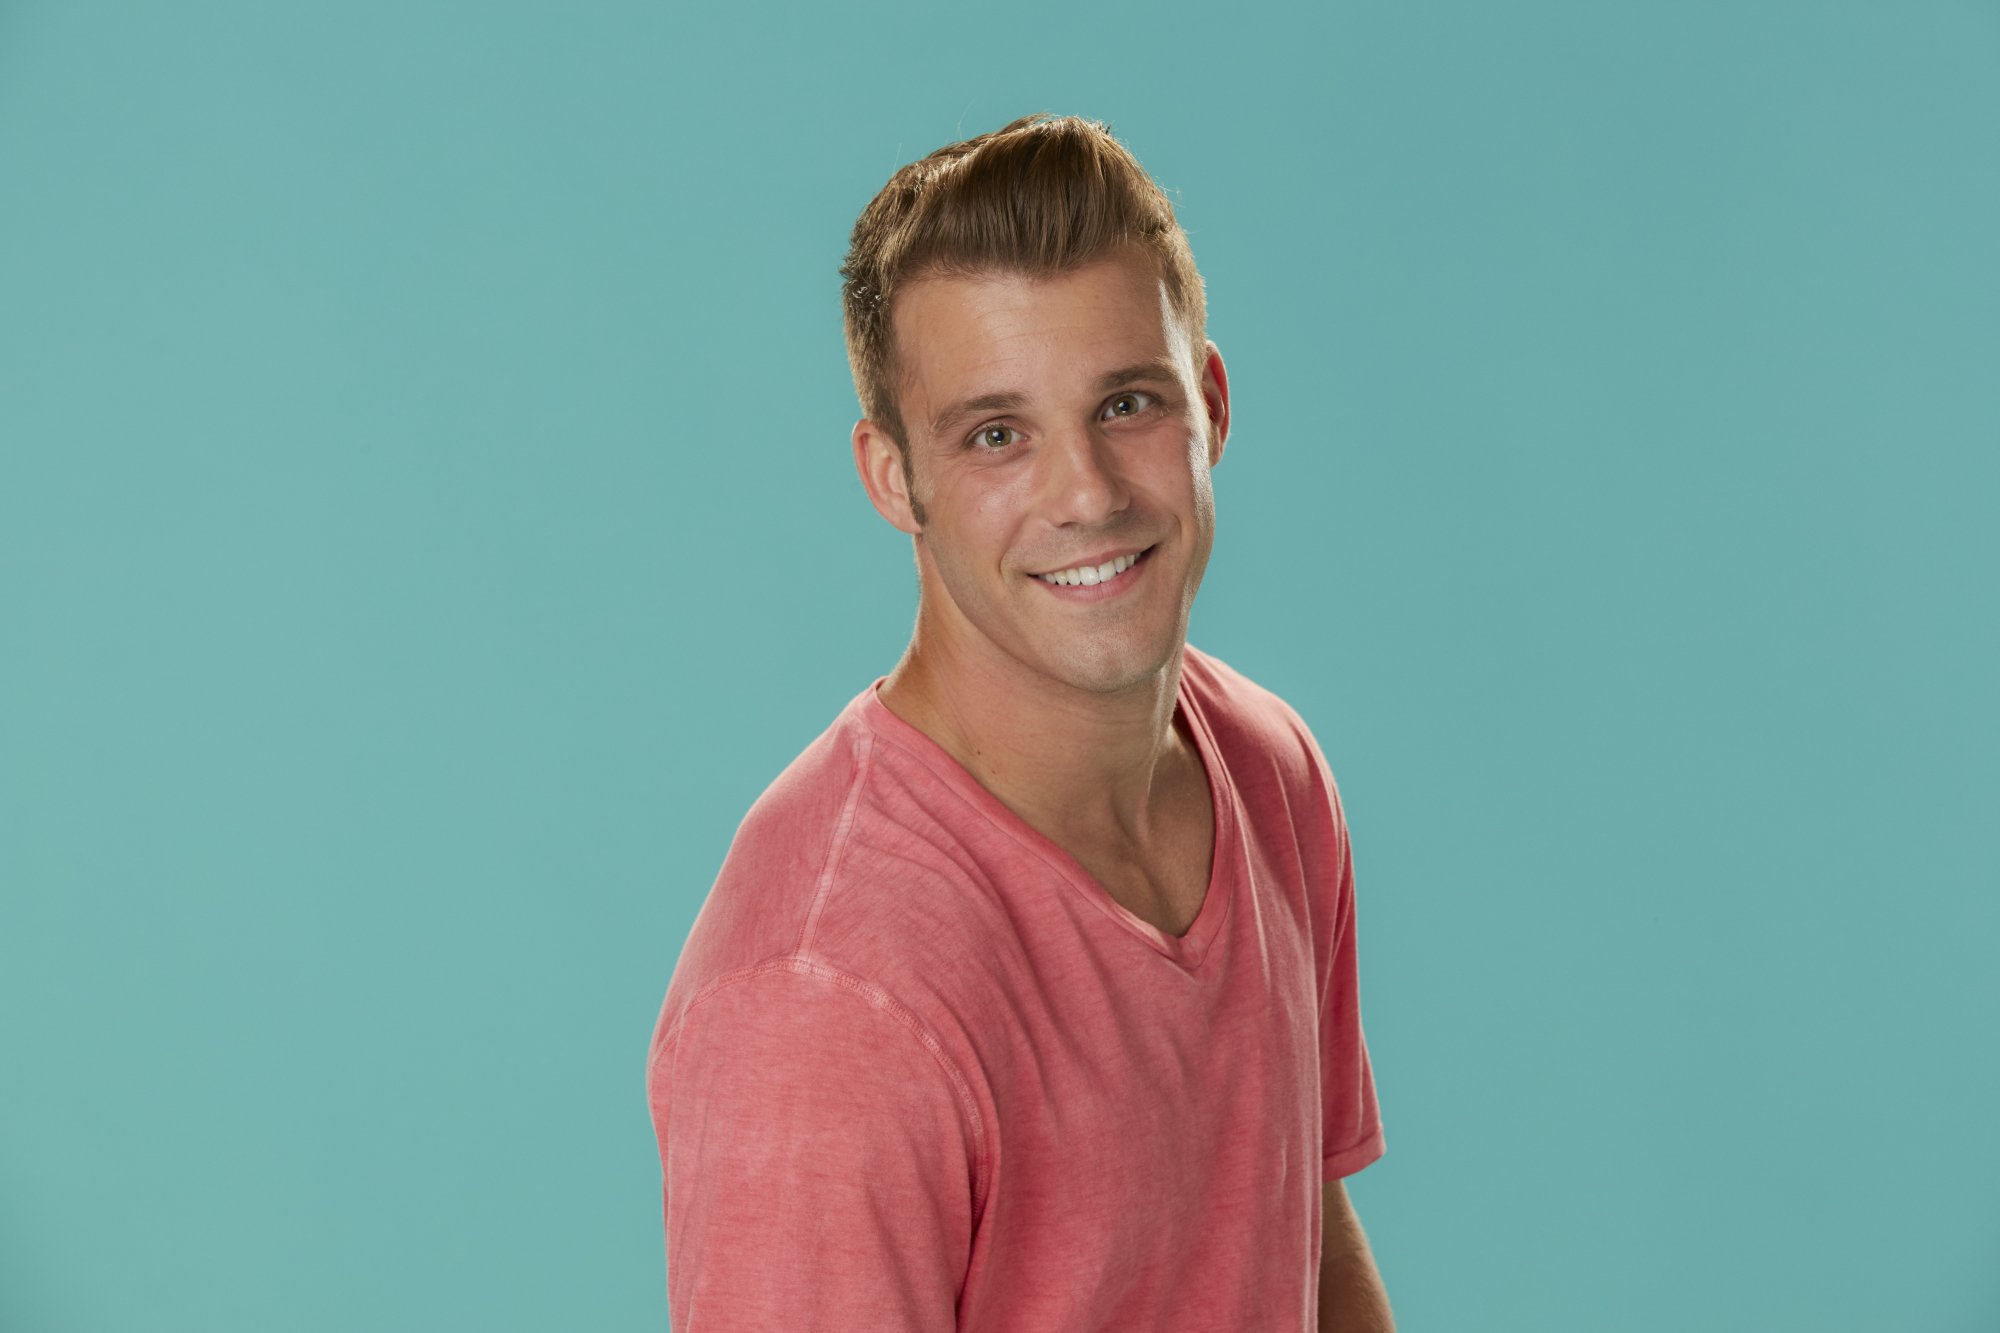 Interview - PAULIE CALAFIORE - MTV's The Challenge, Big Brother - #ALISTERS  Episode 13 - YouTube